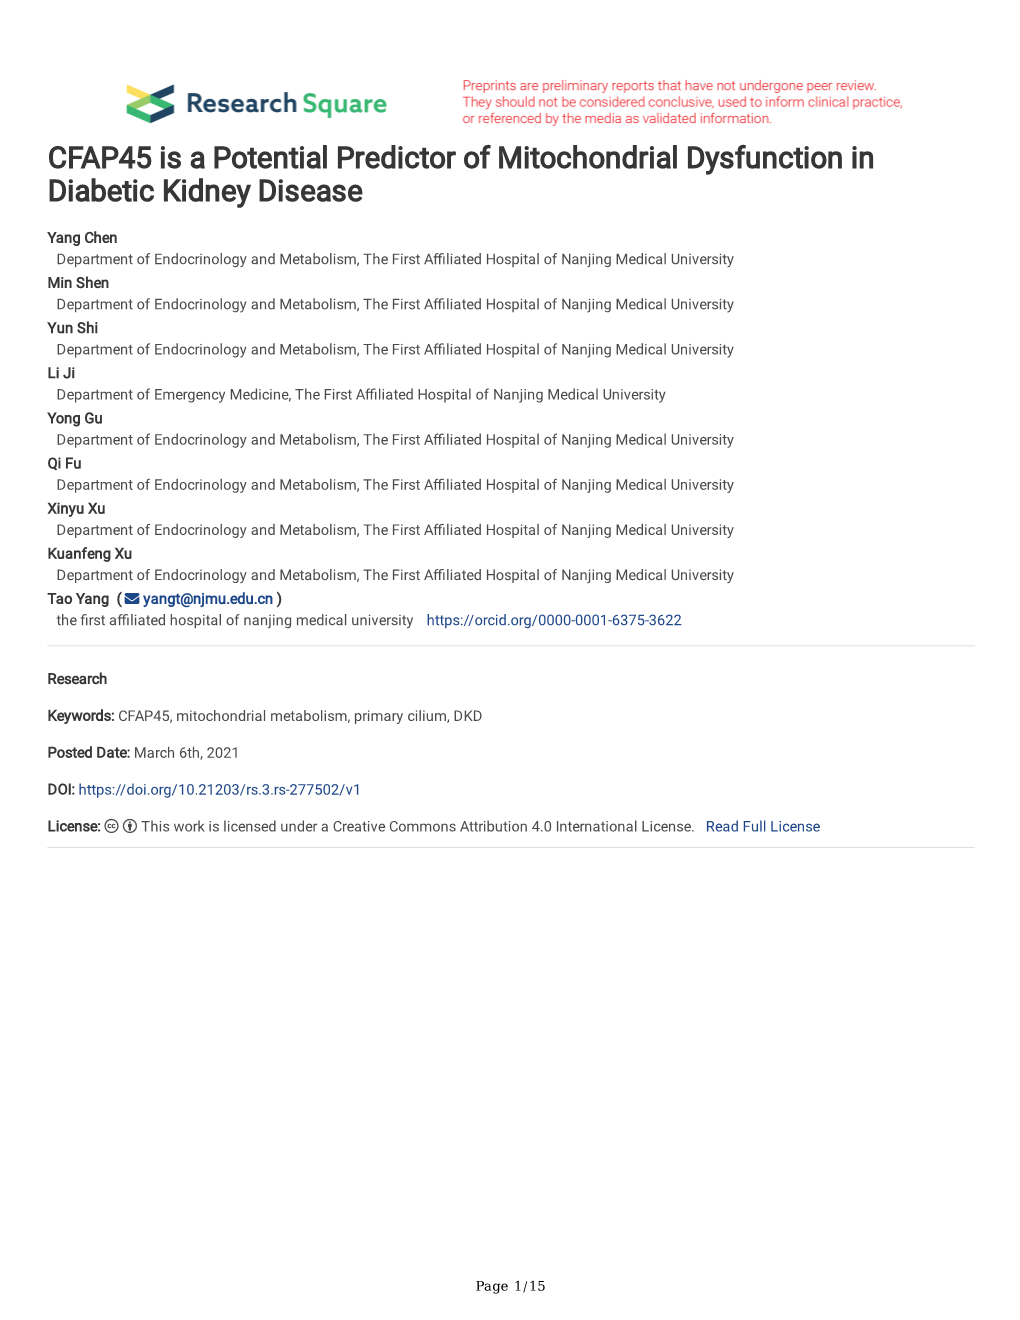 CFAP45 Is a Potential Predictor of Mitochondrial Dysfunction in Diabetic Kidney Disease